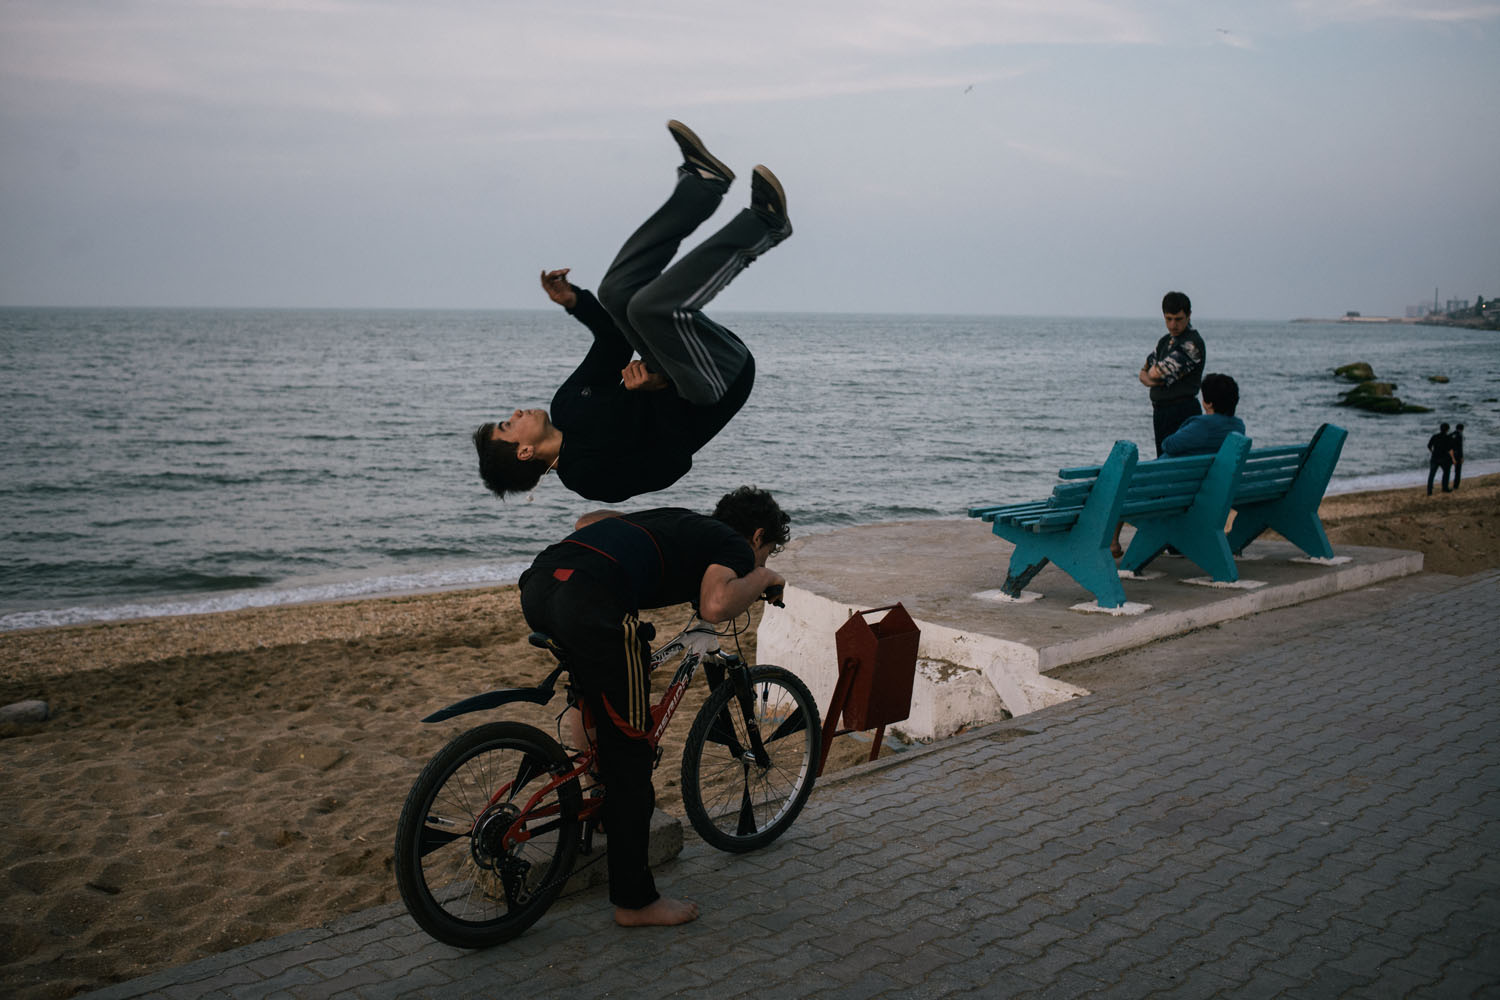 Dagestan boys Parkour at the beach in Makhachkala on May 15, 2013.